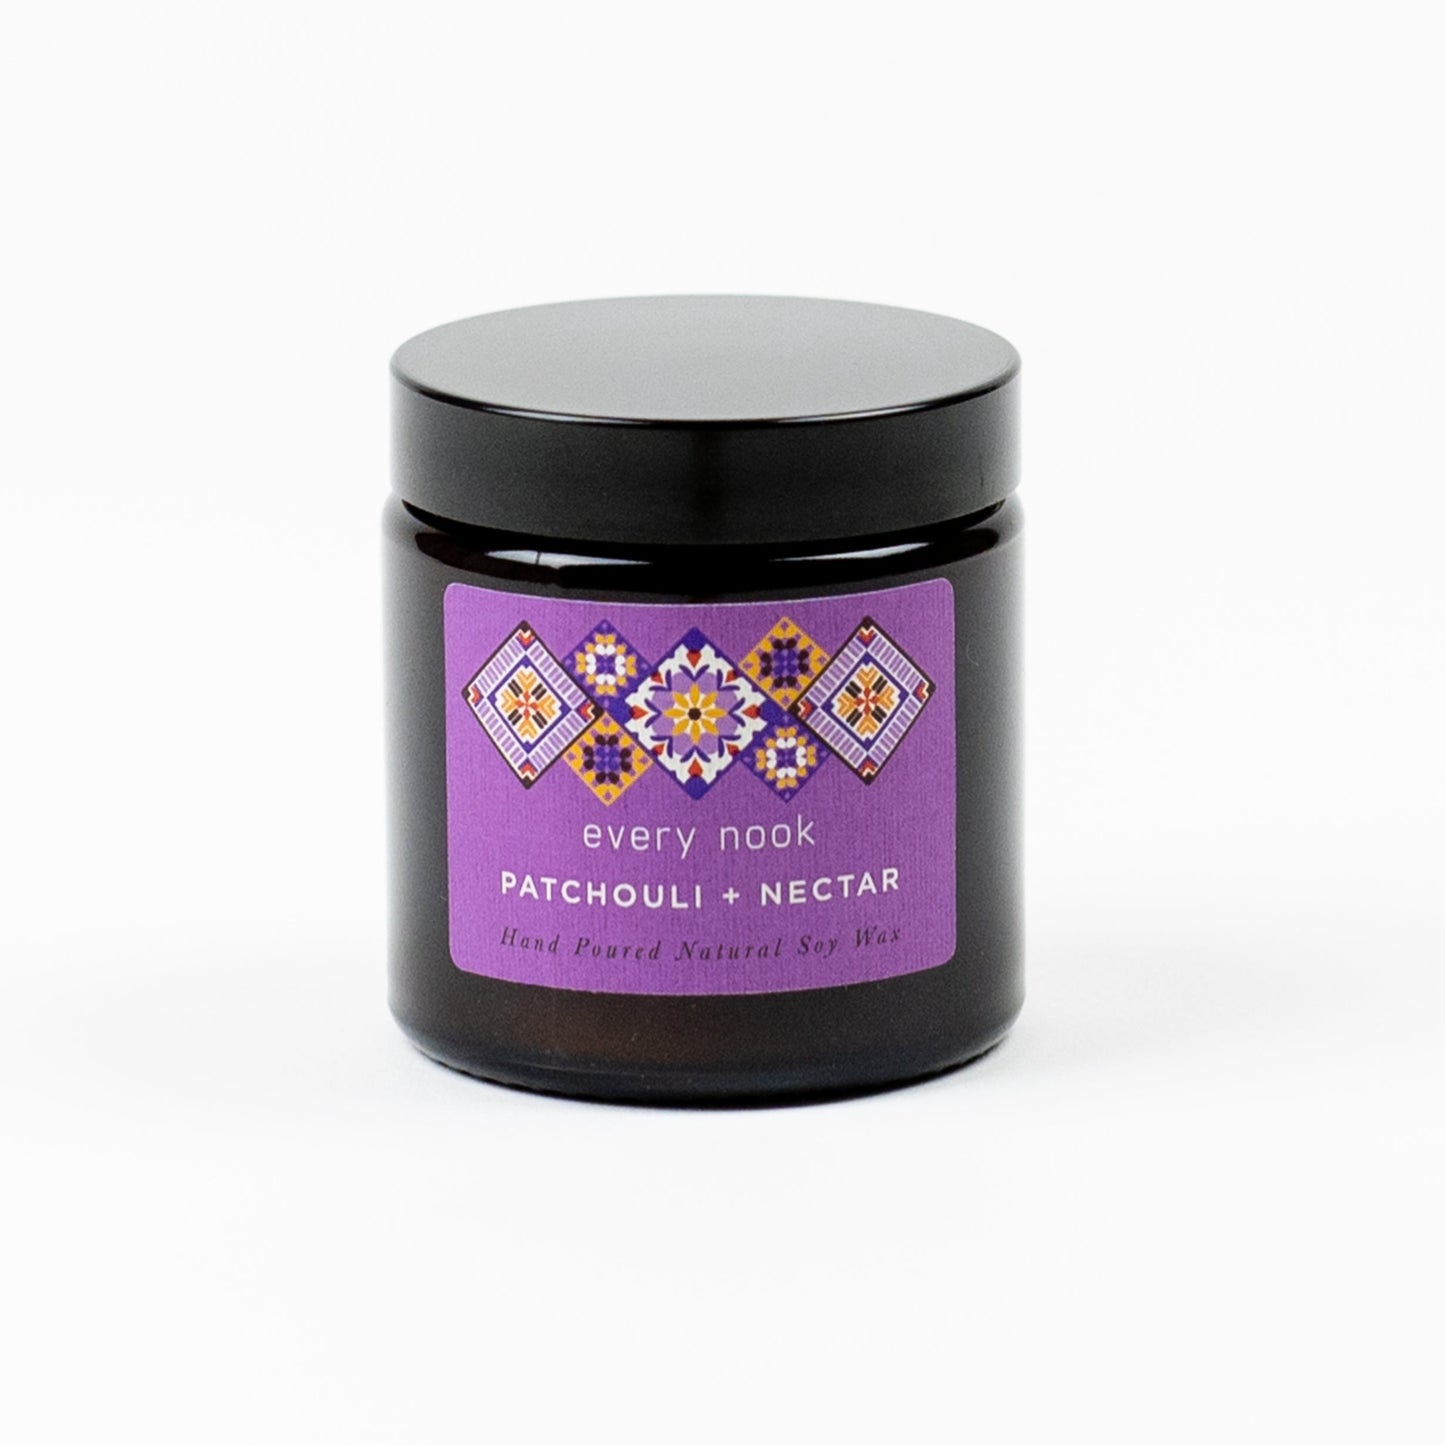 Patchouli + Nectar small scented candle